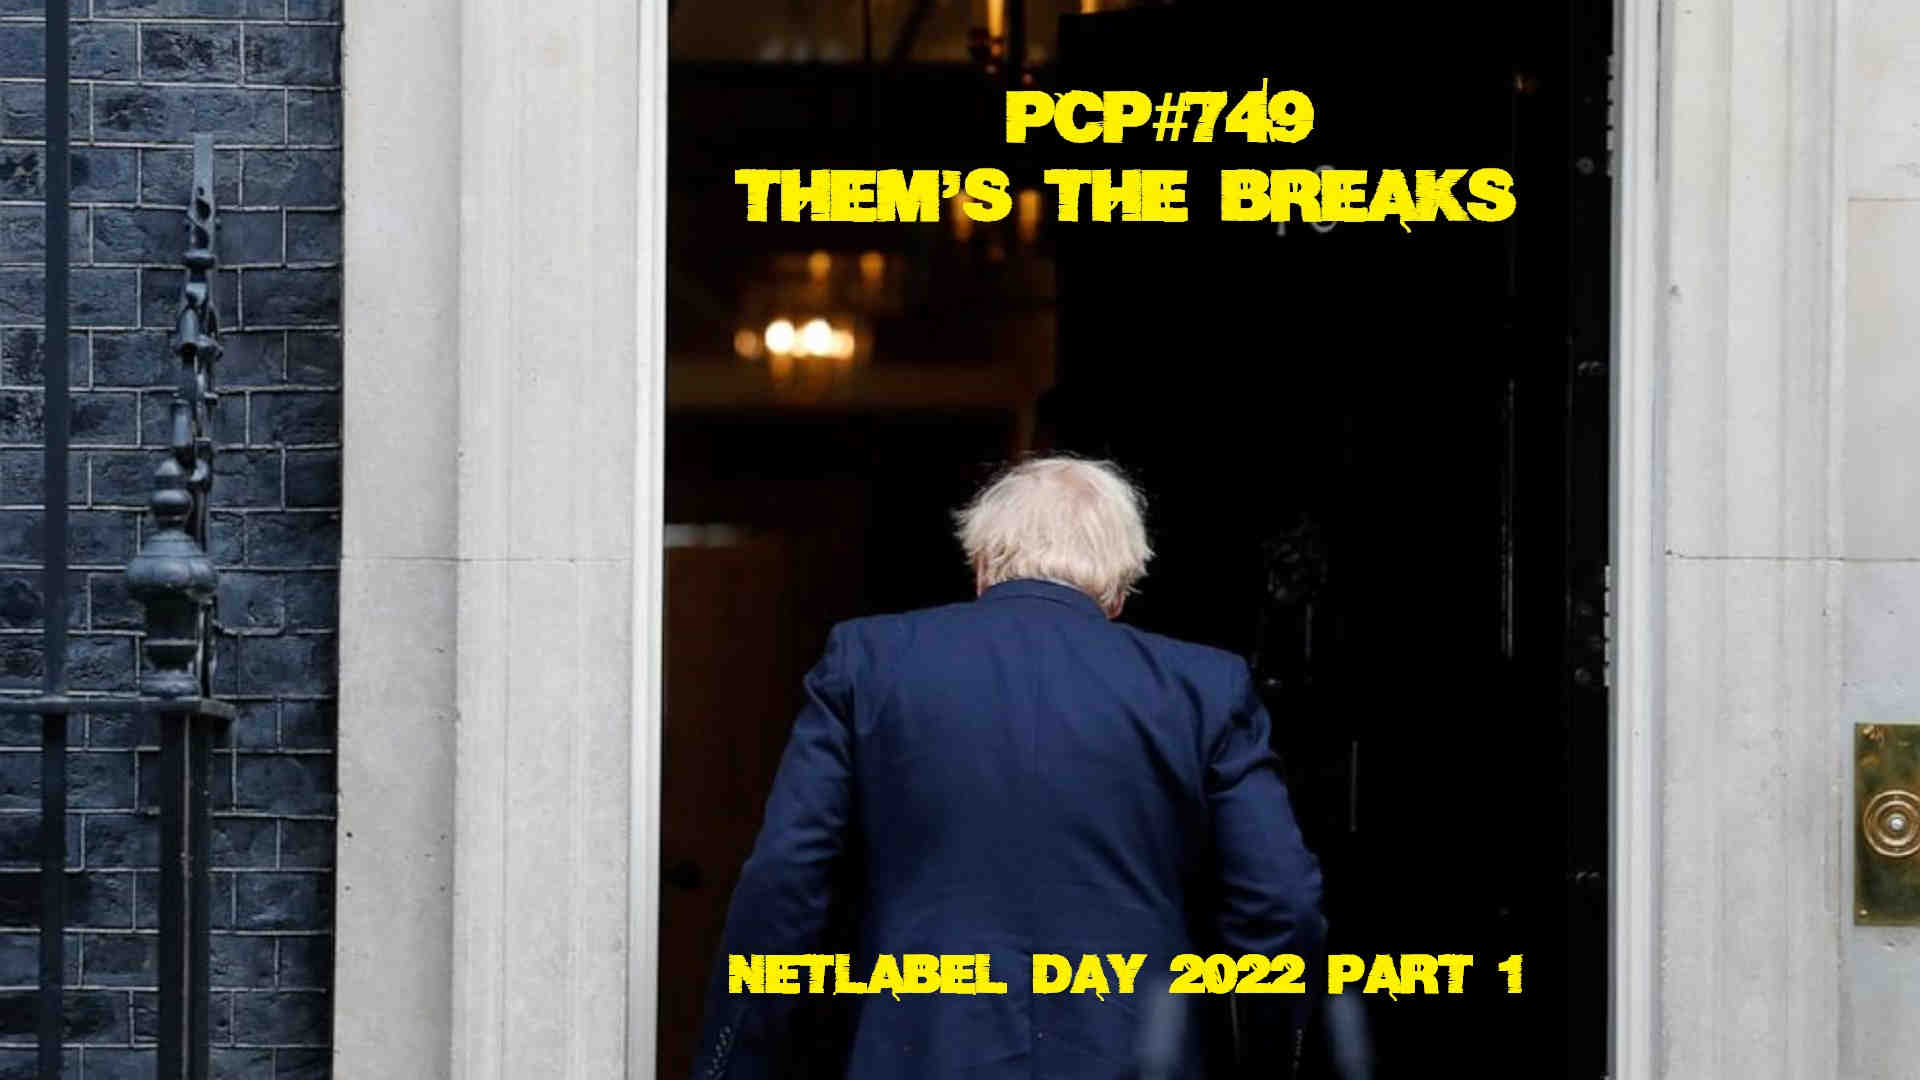 PCP#749... Them's The Breaks...